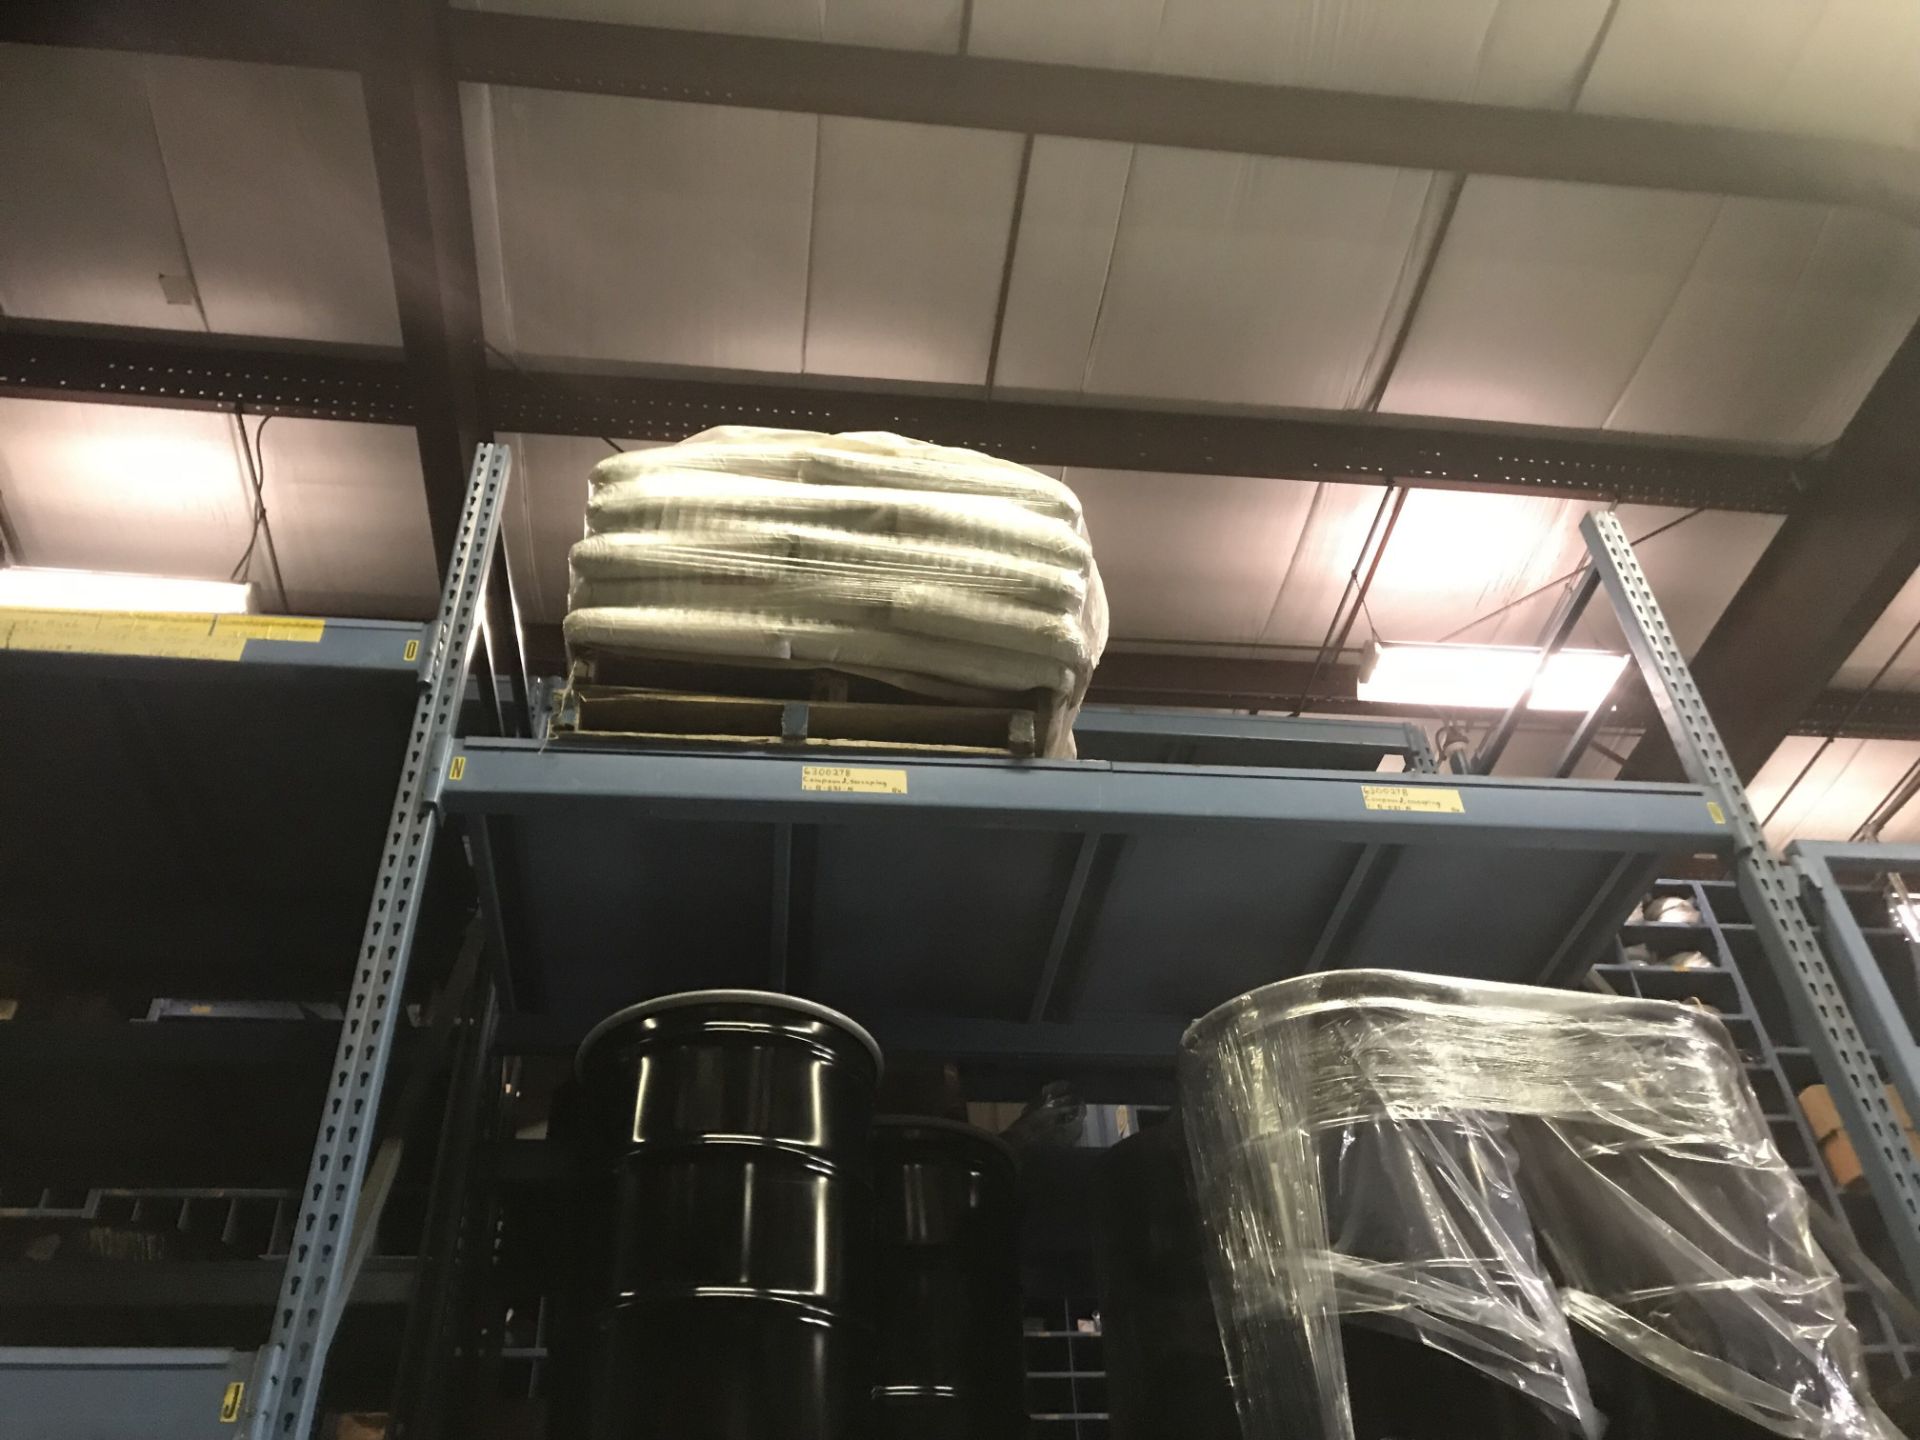 All Contents On Pallet Racking: Light Bulbs (AD) - Image 2 of 2